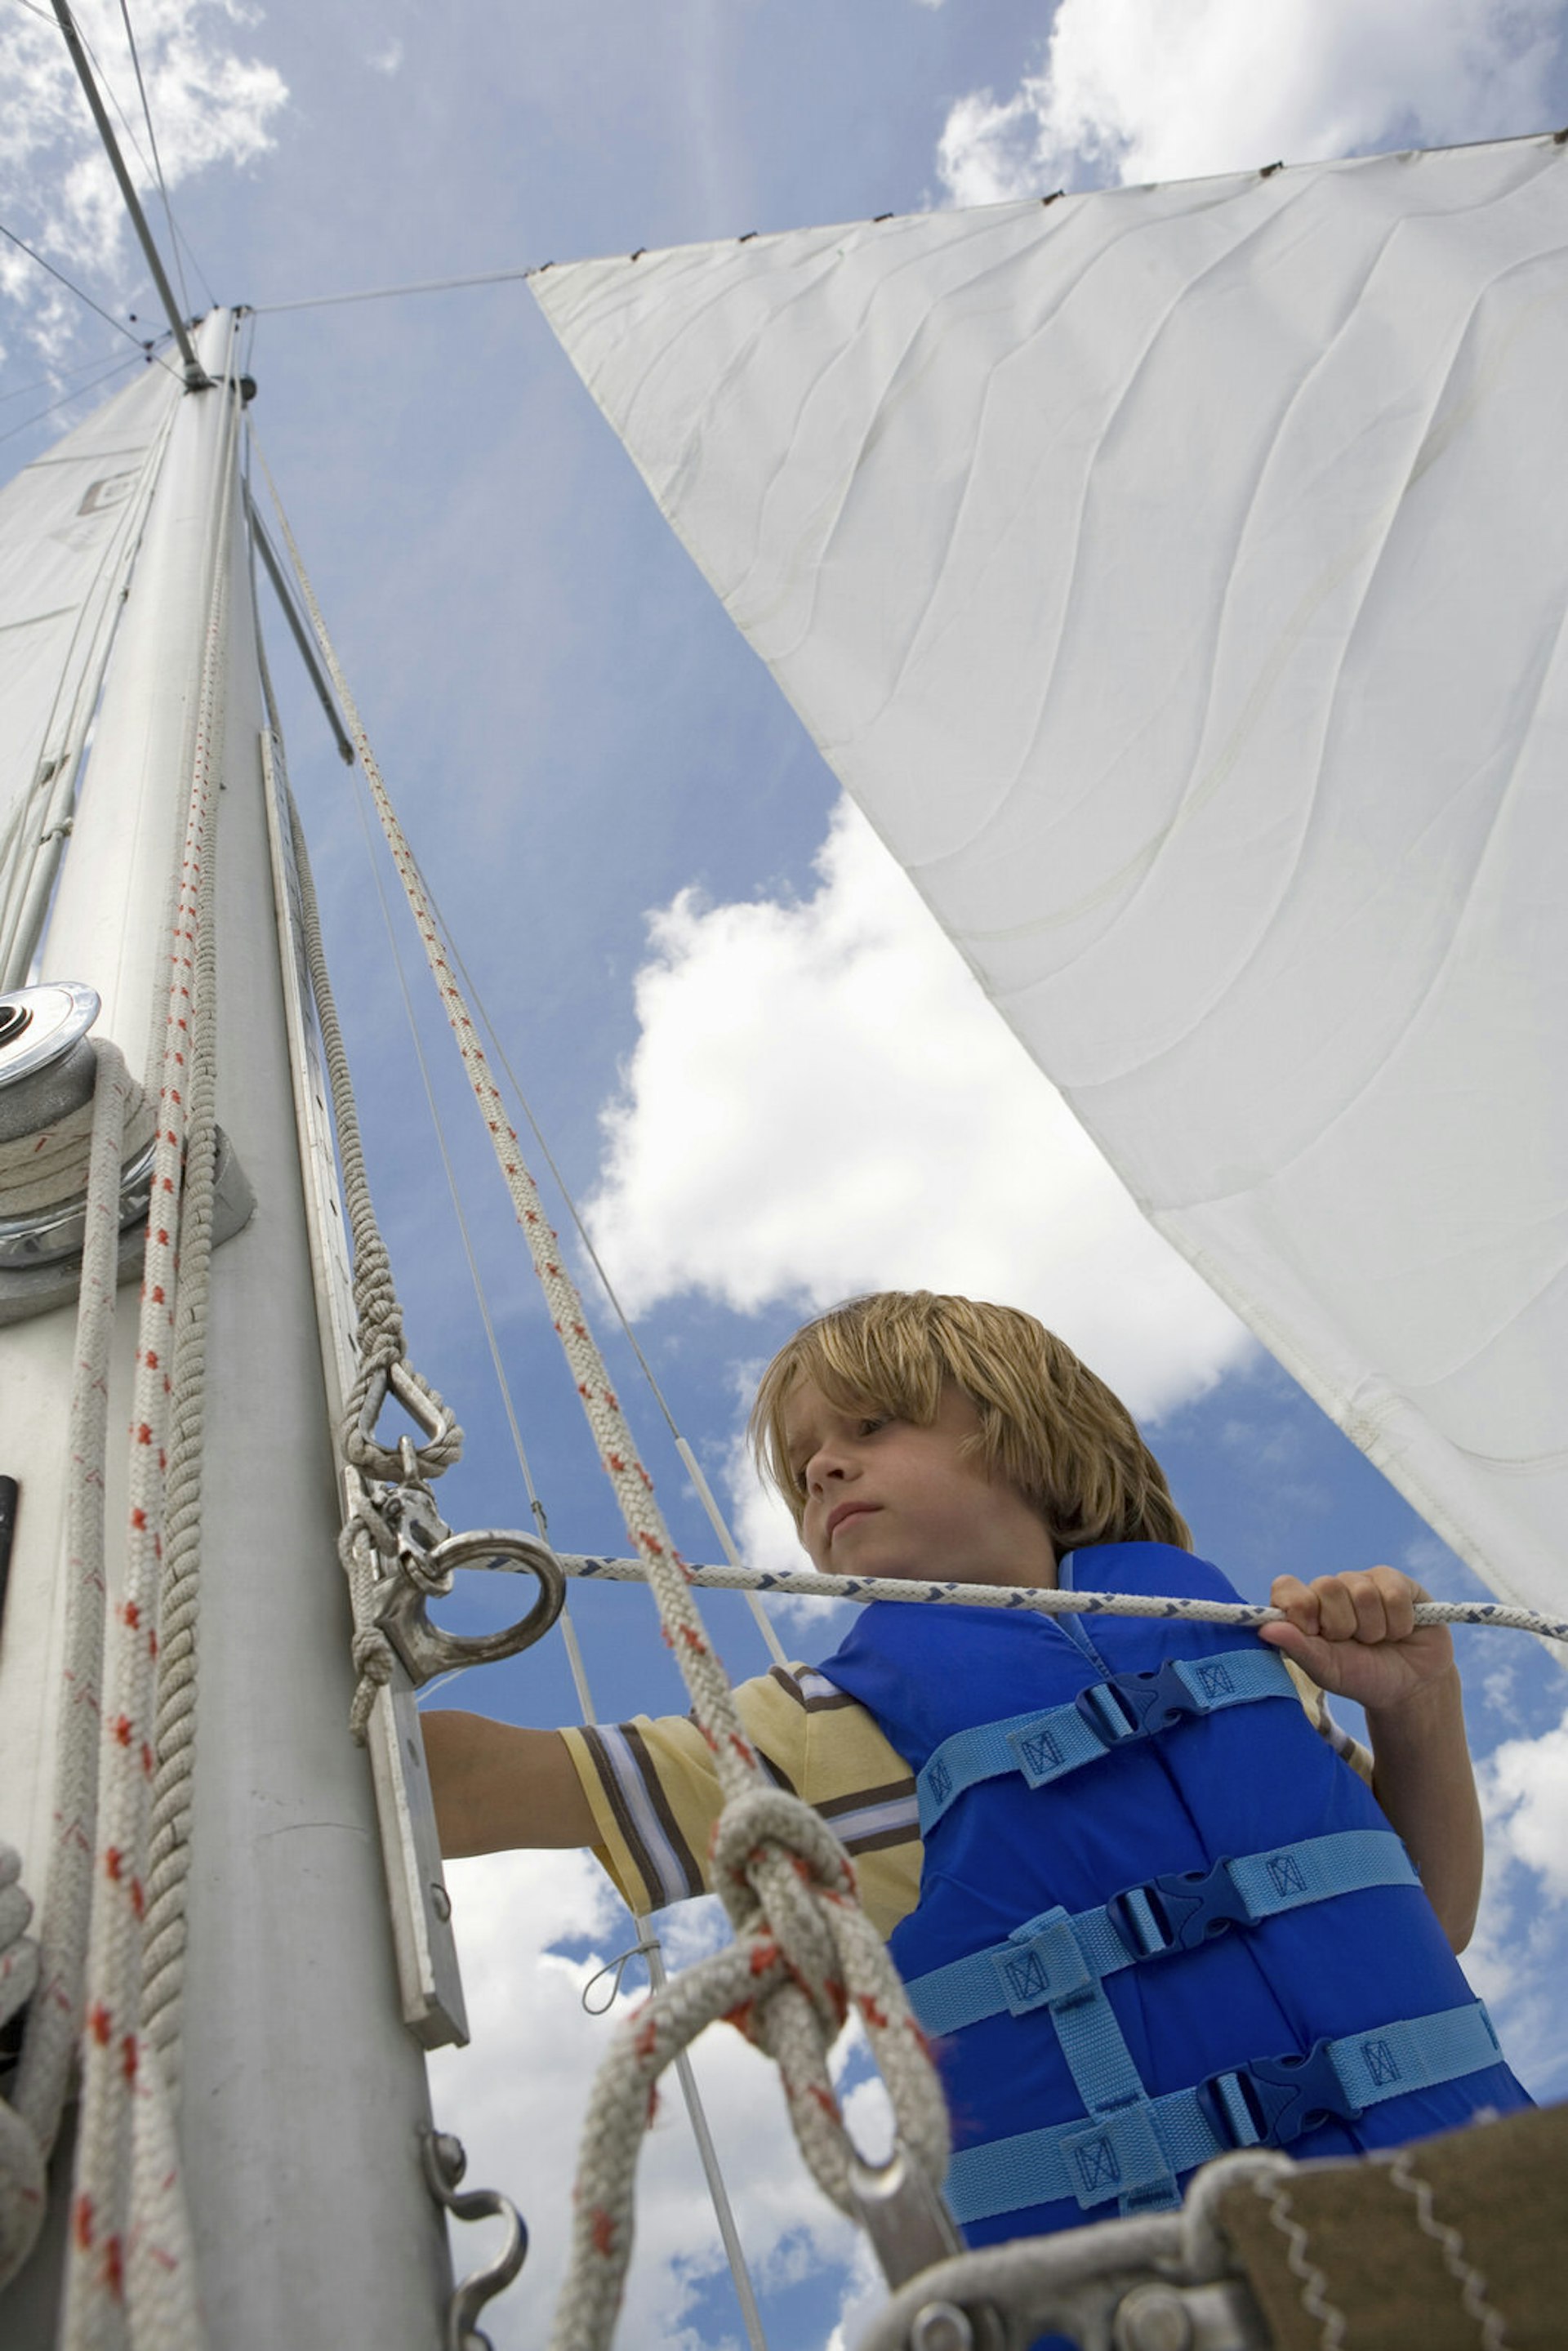 A young boy wearing a bright blue life jacket ties a rope on a sailboat, with the sail towering above him